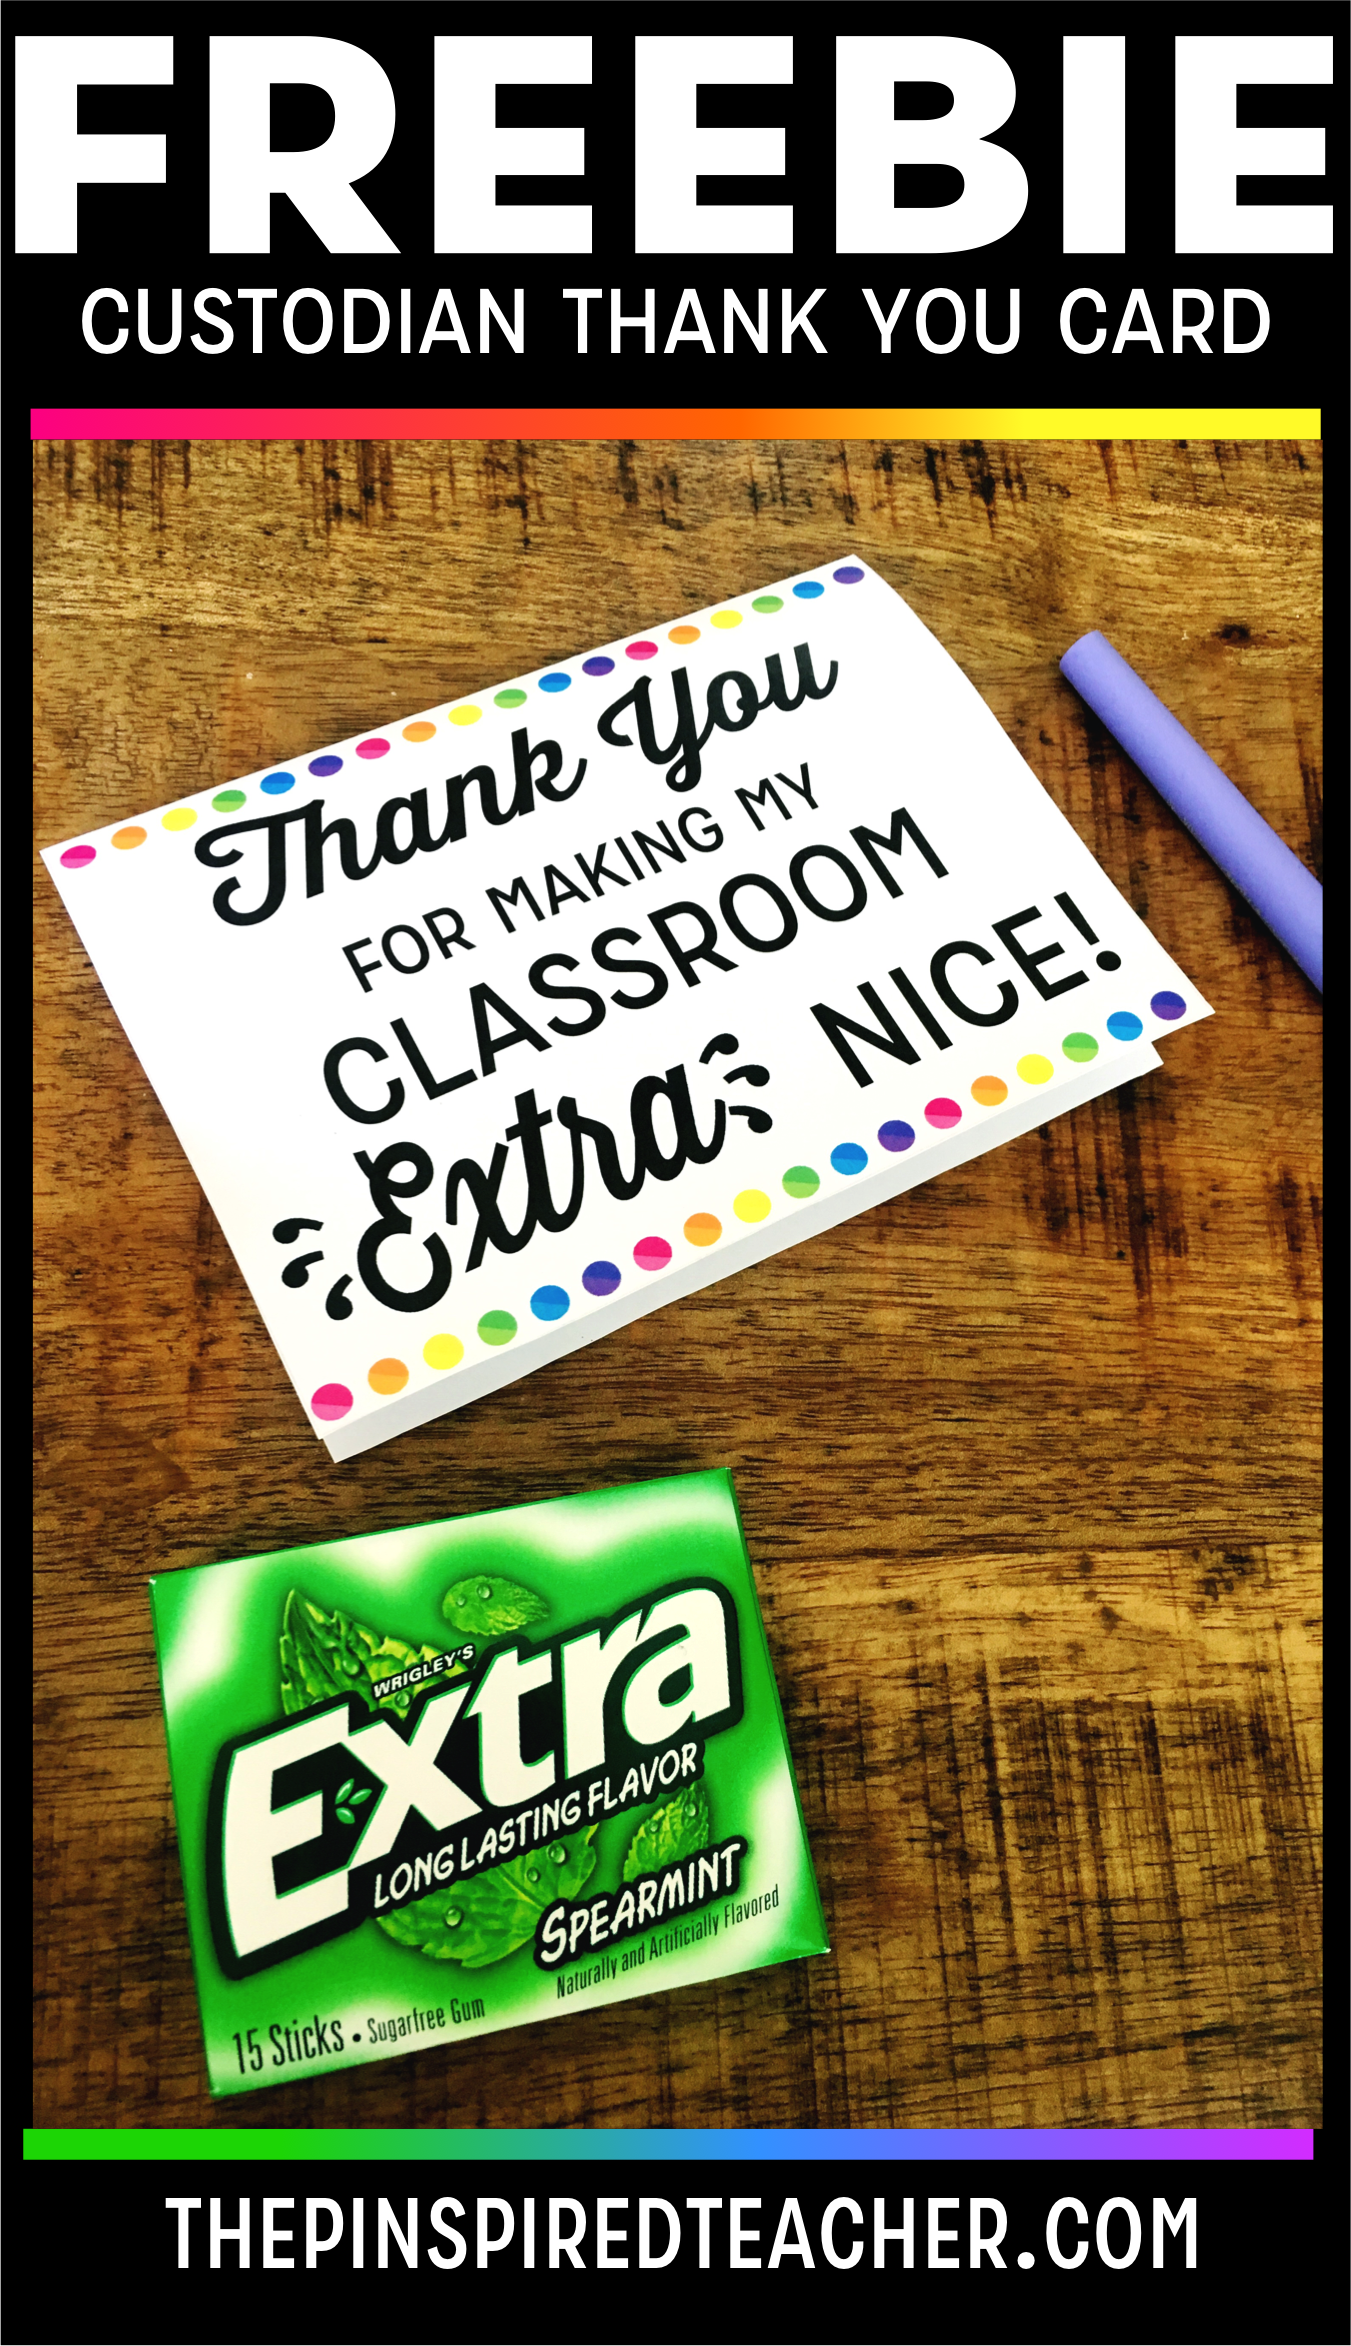 Teacher gift ideas for their custodian to show their appreciation! FREE download! by The Pinspired Teacher